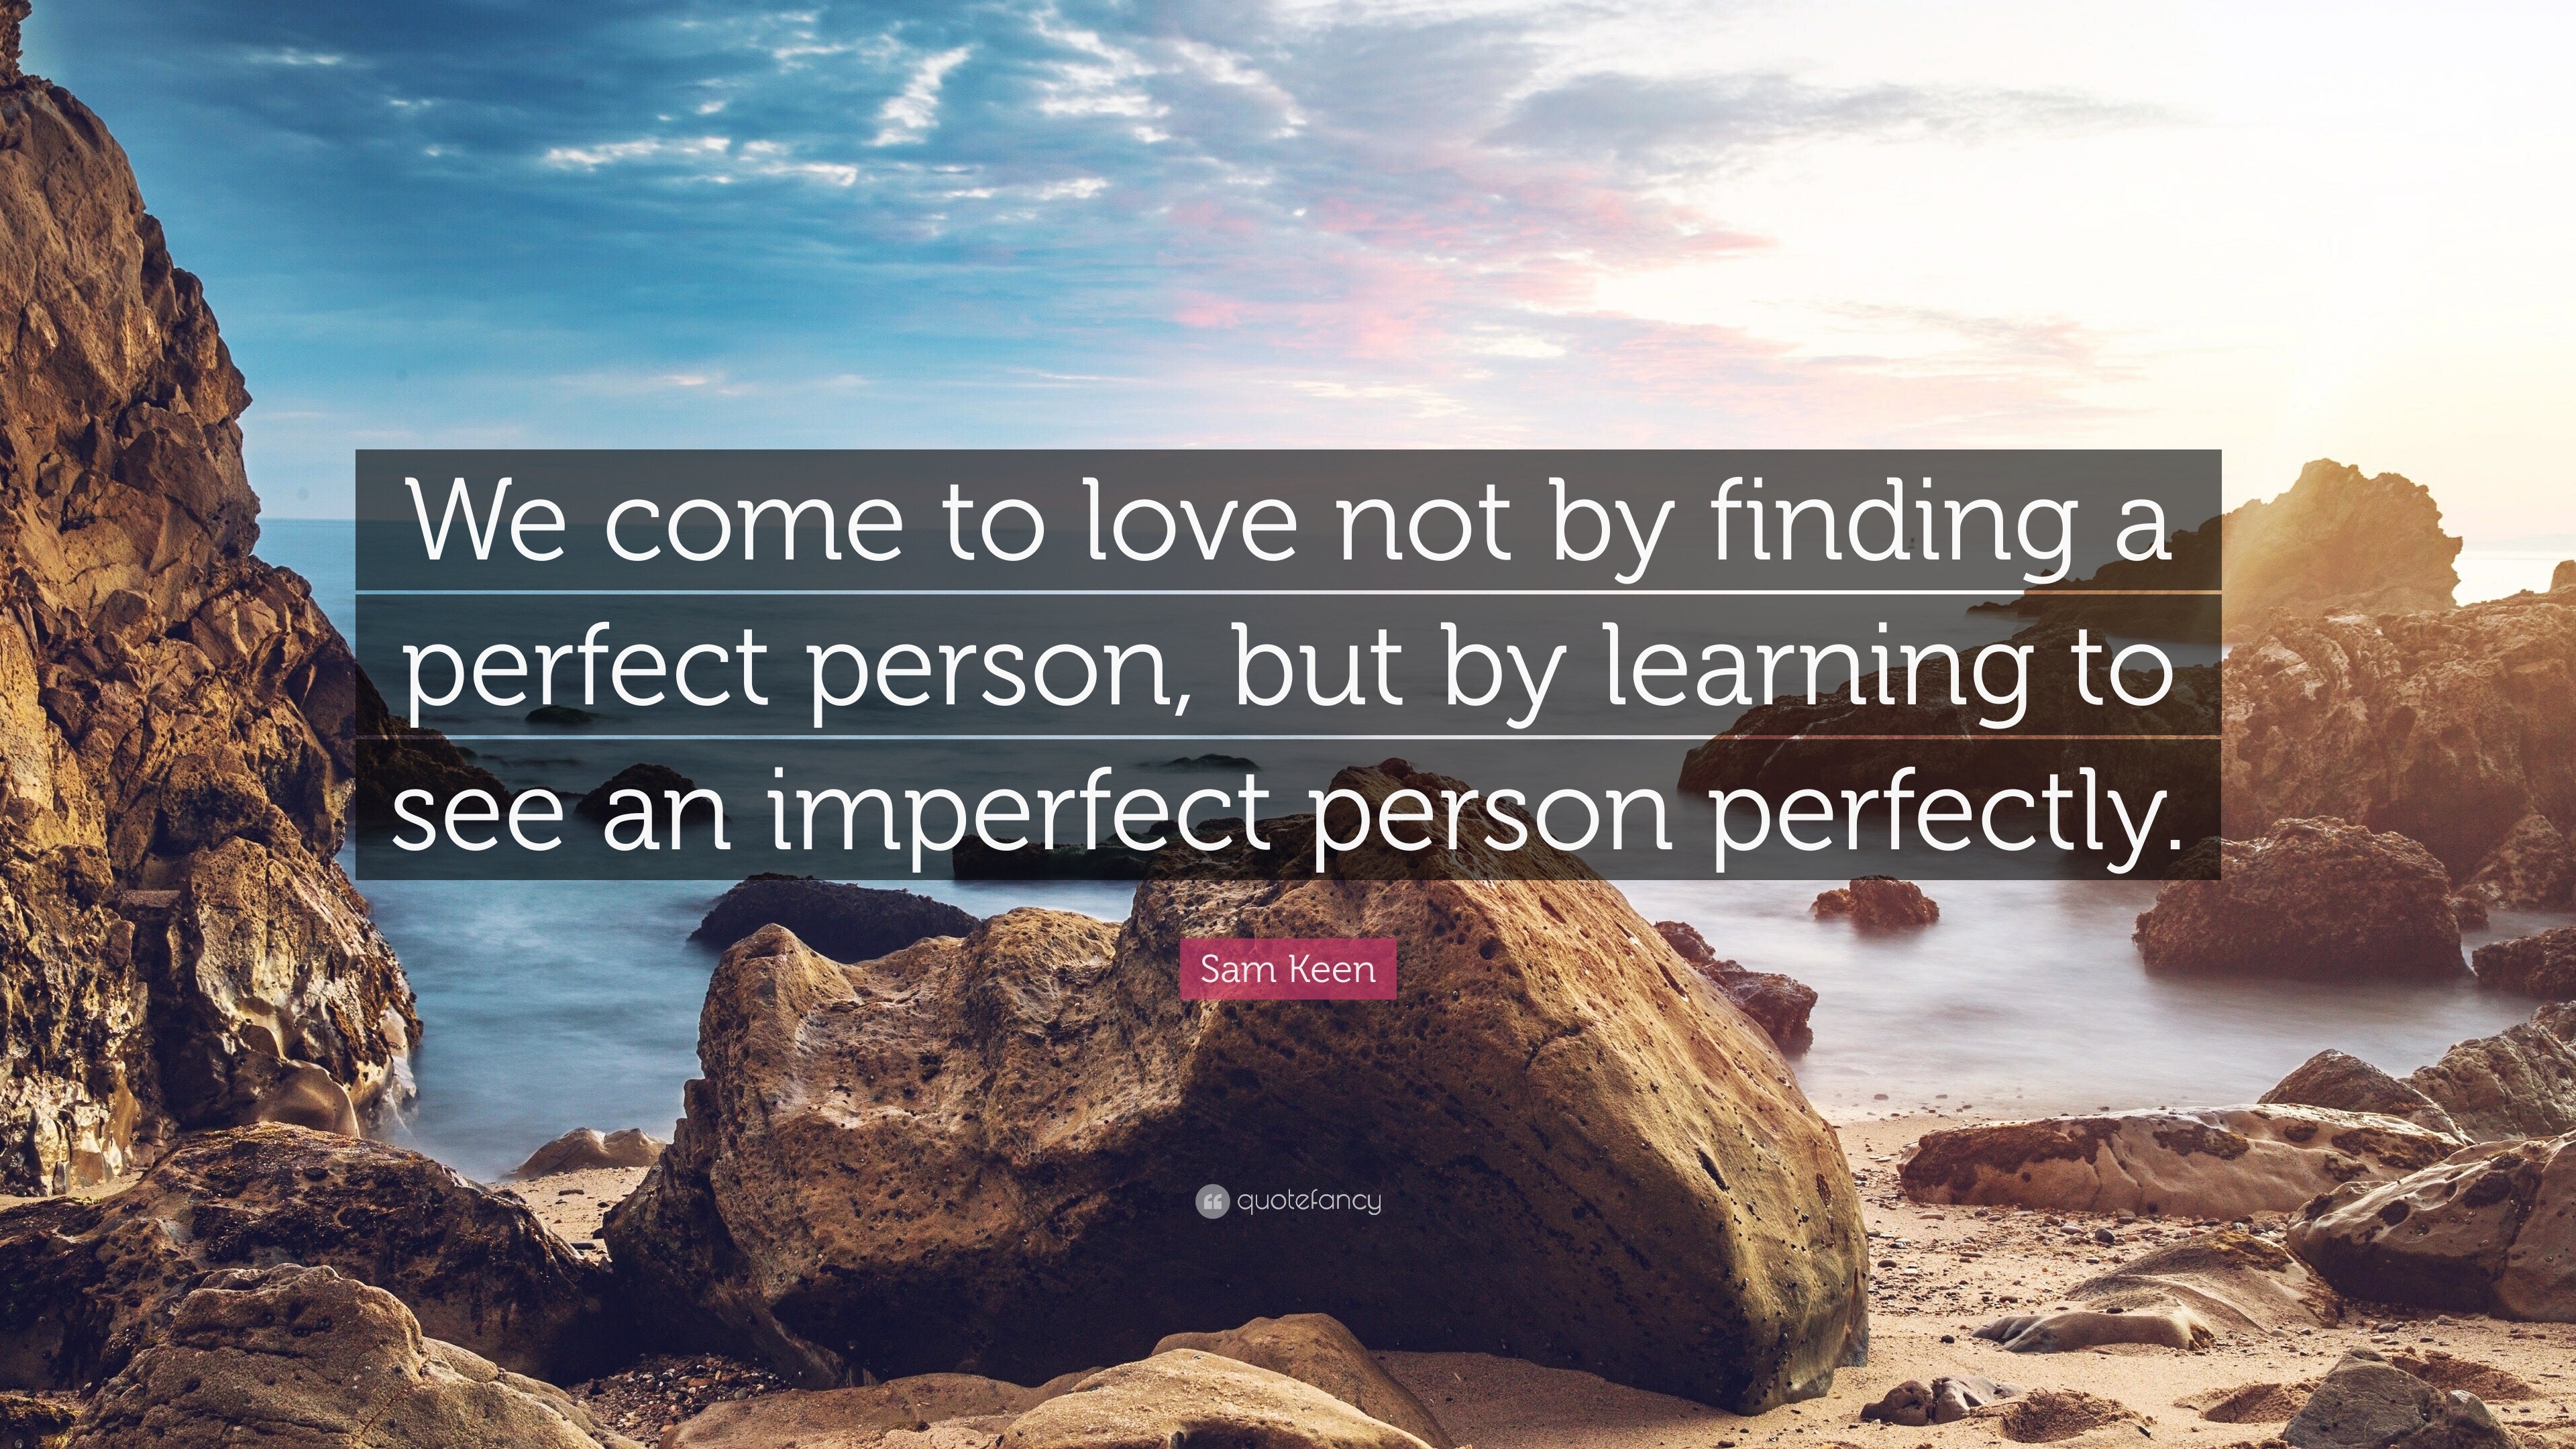 Sam Keen Quote: “We come to love not by finding a perfect person, but by  learning